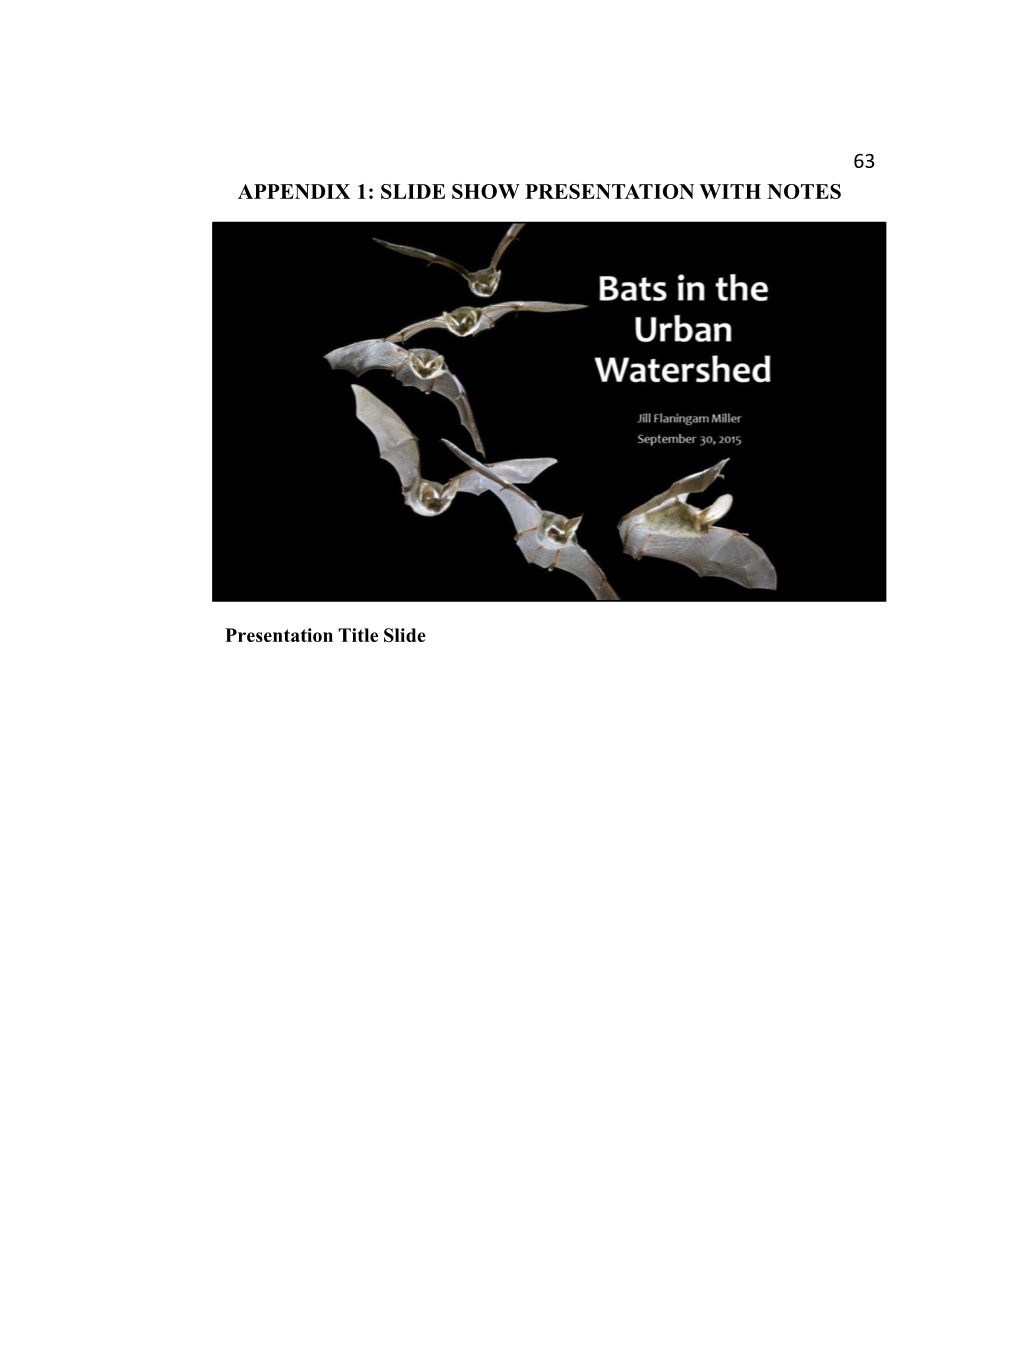 Bats in the Urban Watershed